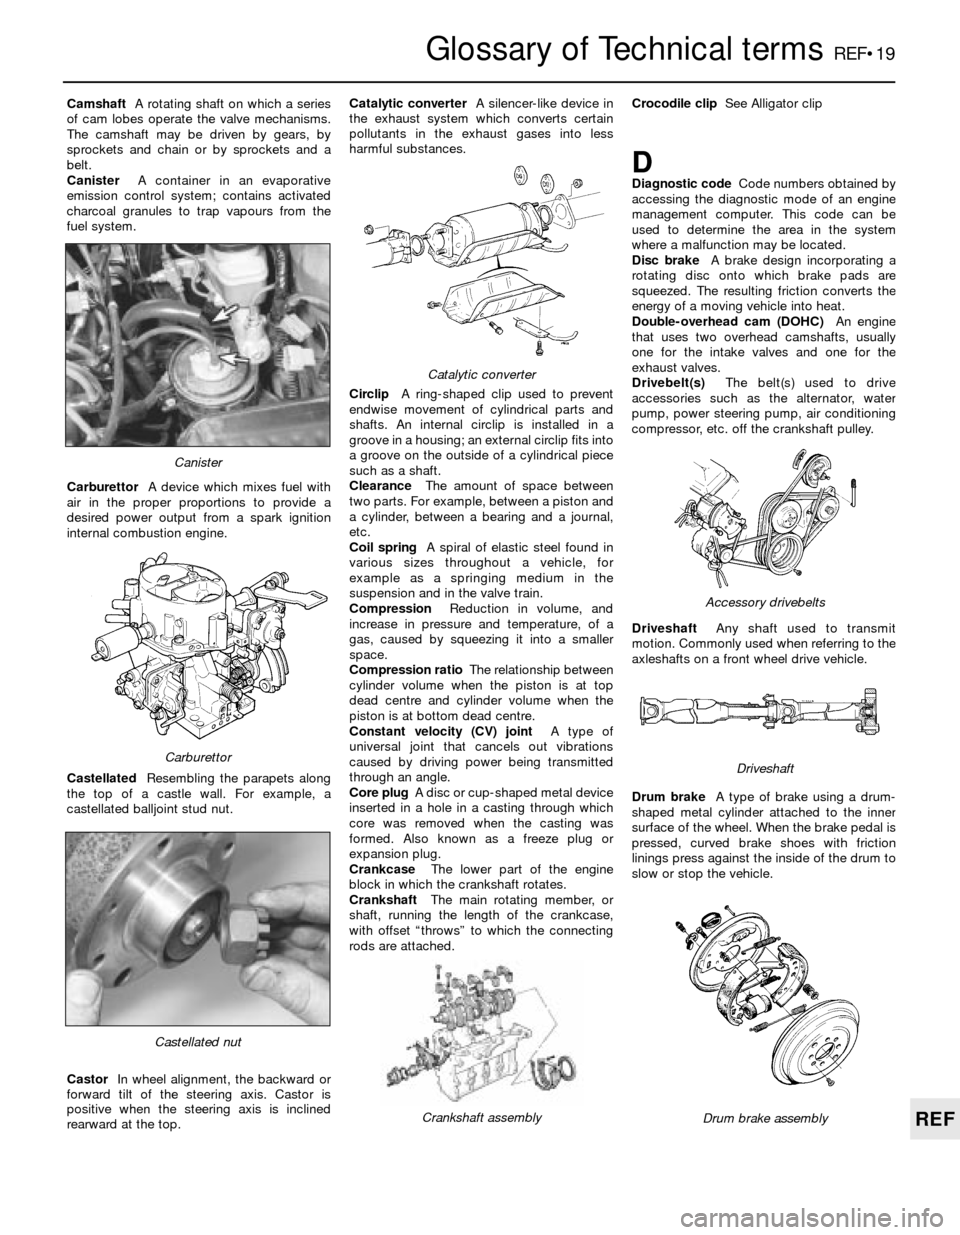 FORD SIERRA 1984 1.G Reference Workshop Manual Glossary of Technical termsREF•19
REF
CamshaftA rotating shaft on which a series
of cam lobes operate the valve mechanisms.
The camshaft may be driven by gears, by
sprockets and chain or by sprocket